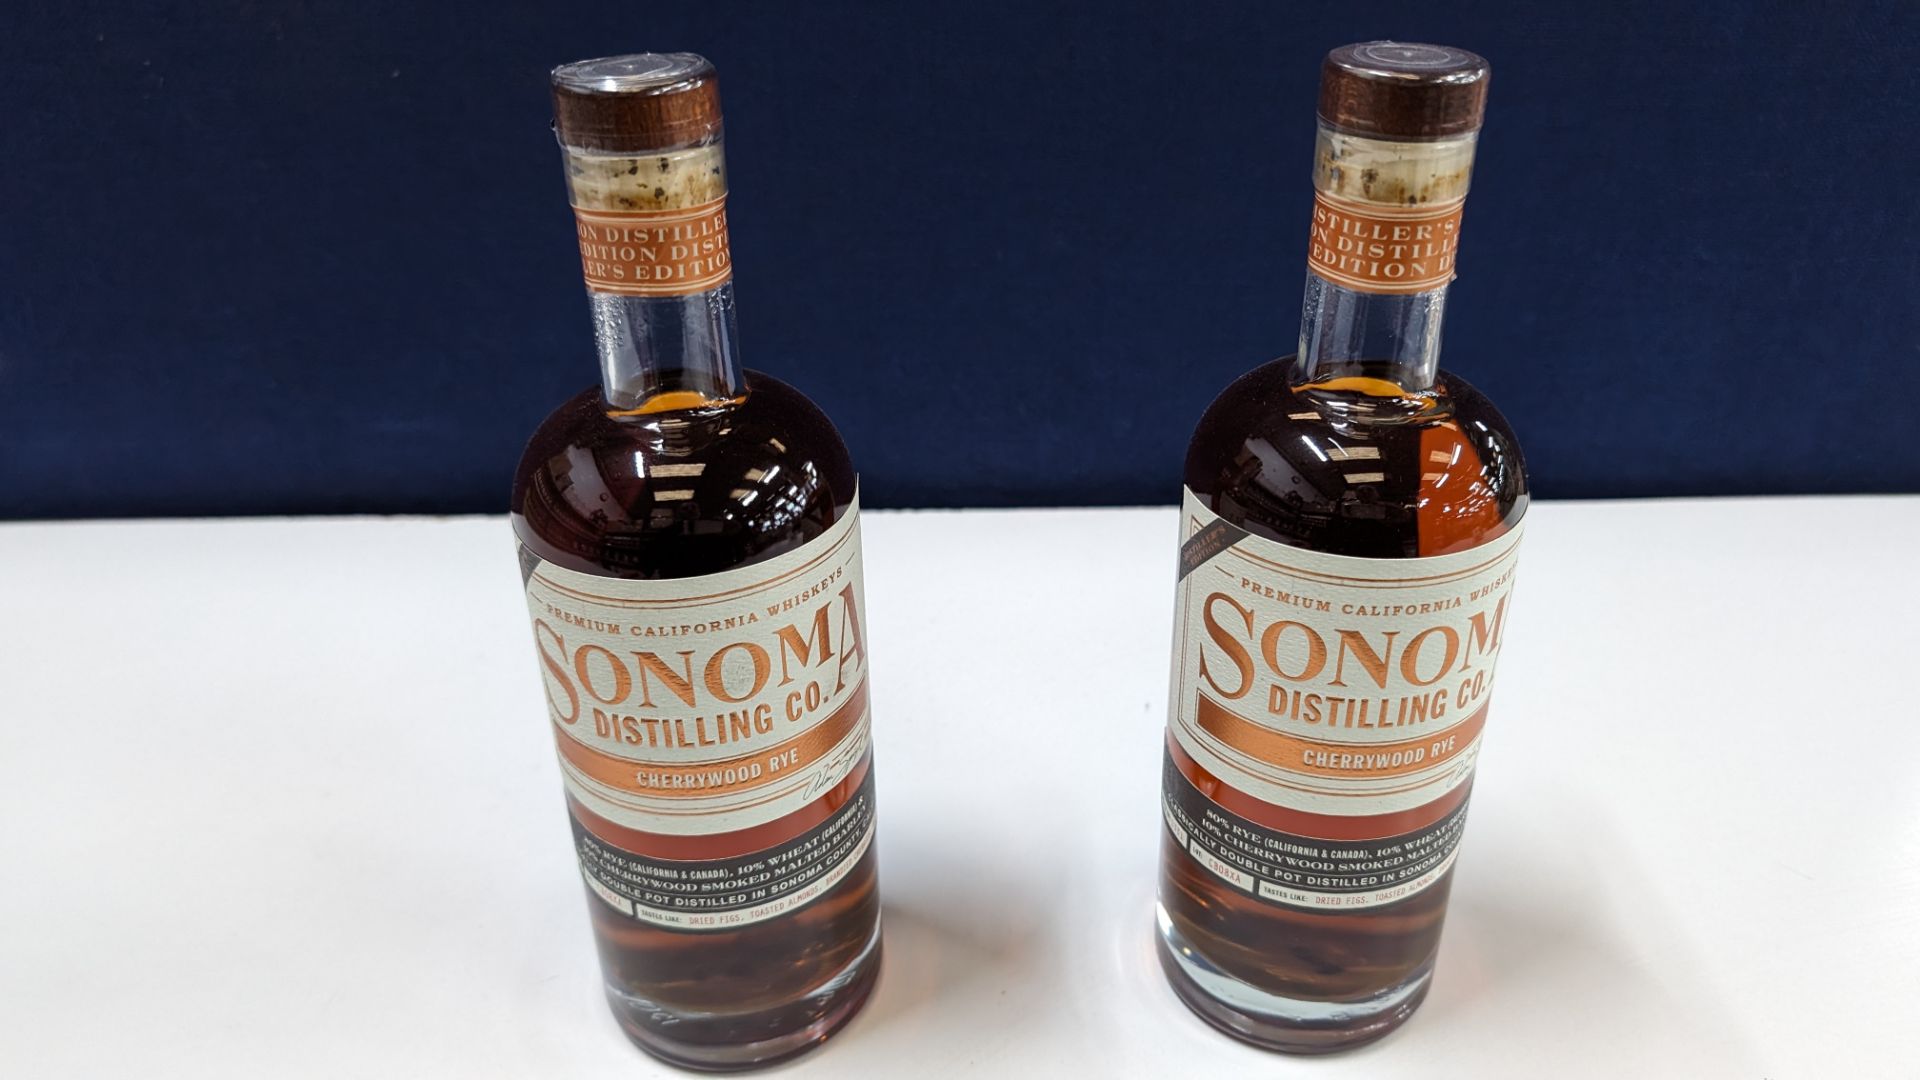 2 off 700ml bottles of Sonoma Cherrywood Rye Whiskey. 47.8% alc/vol (95.6 proof). Distilled and bo